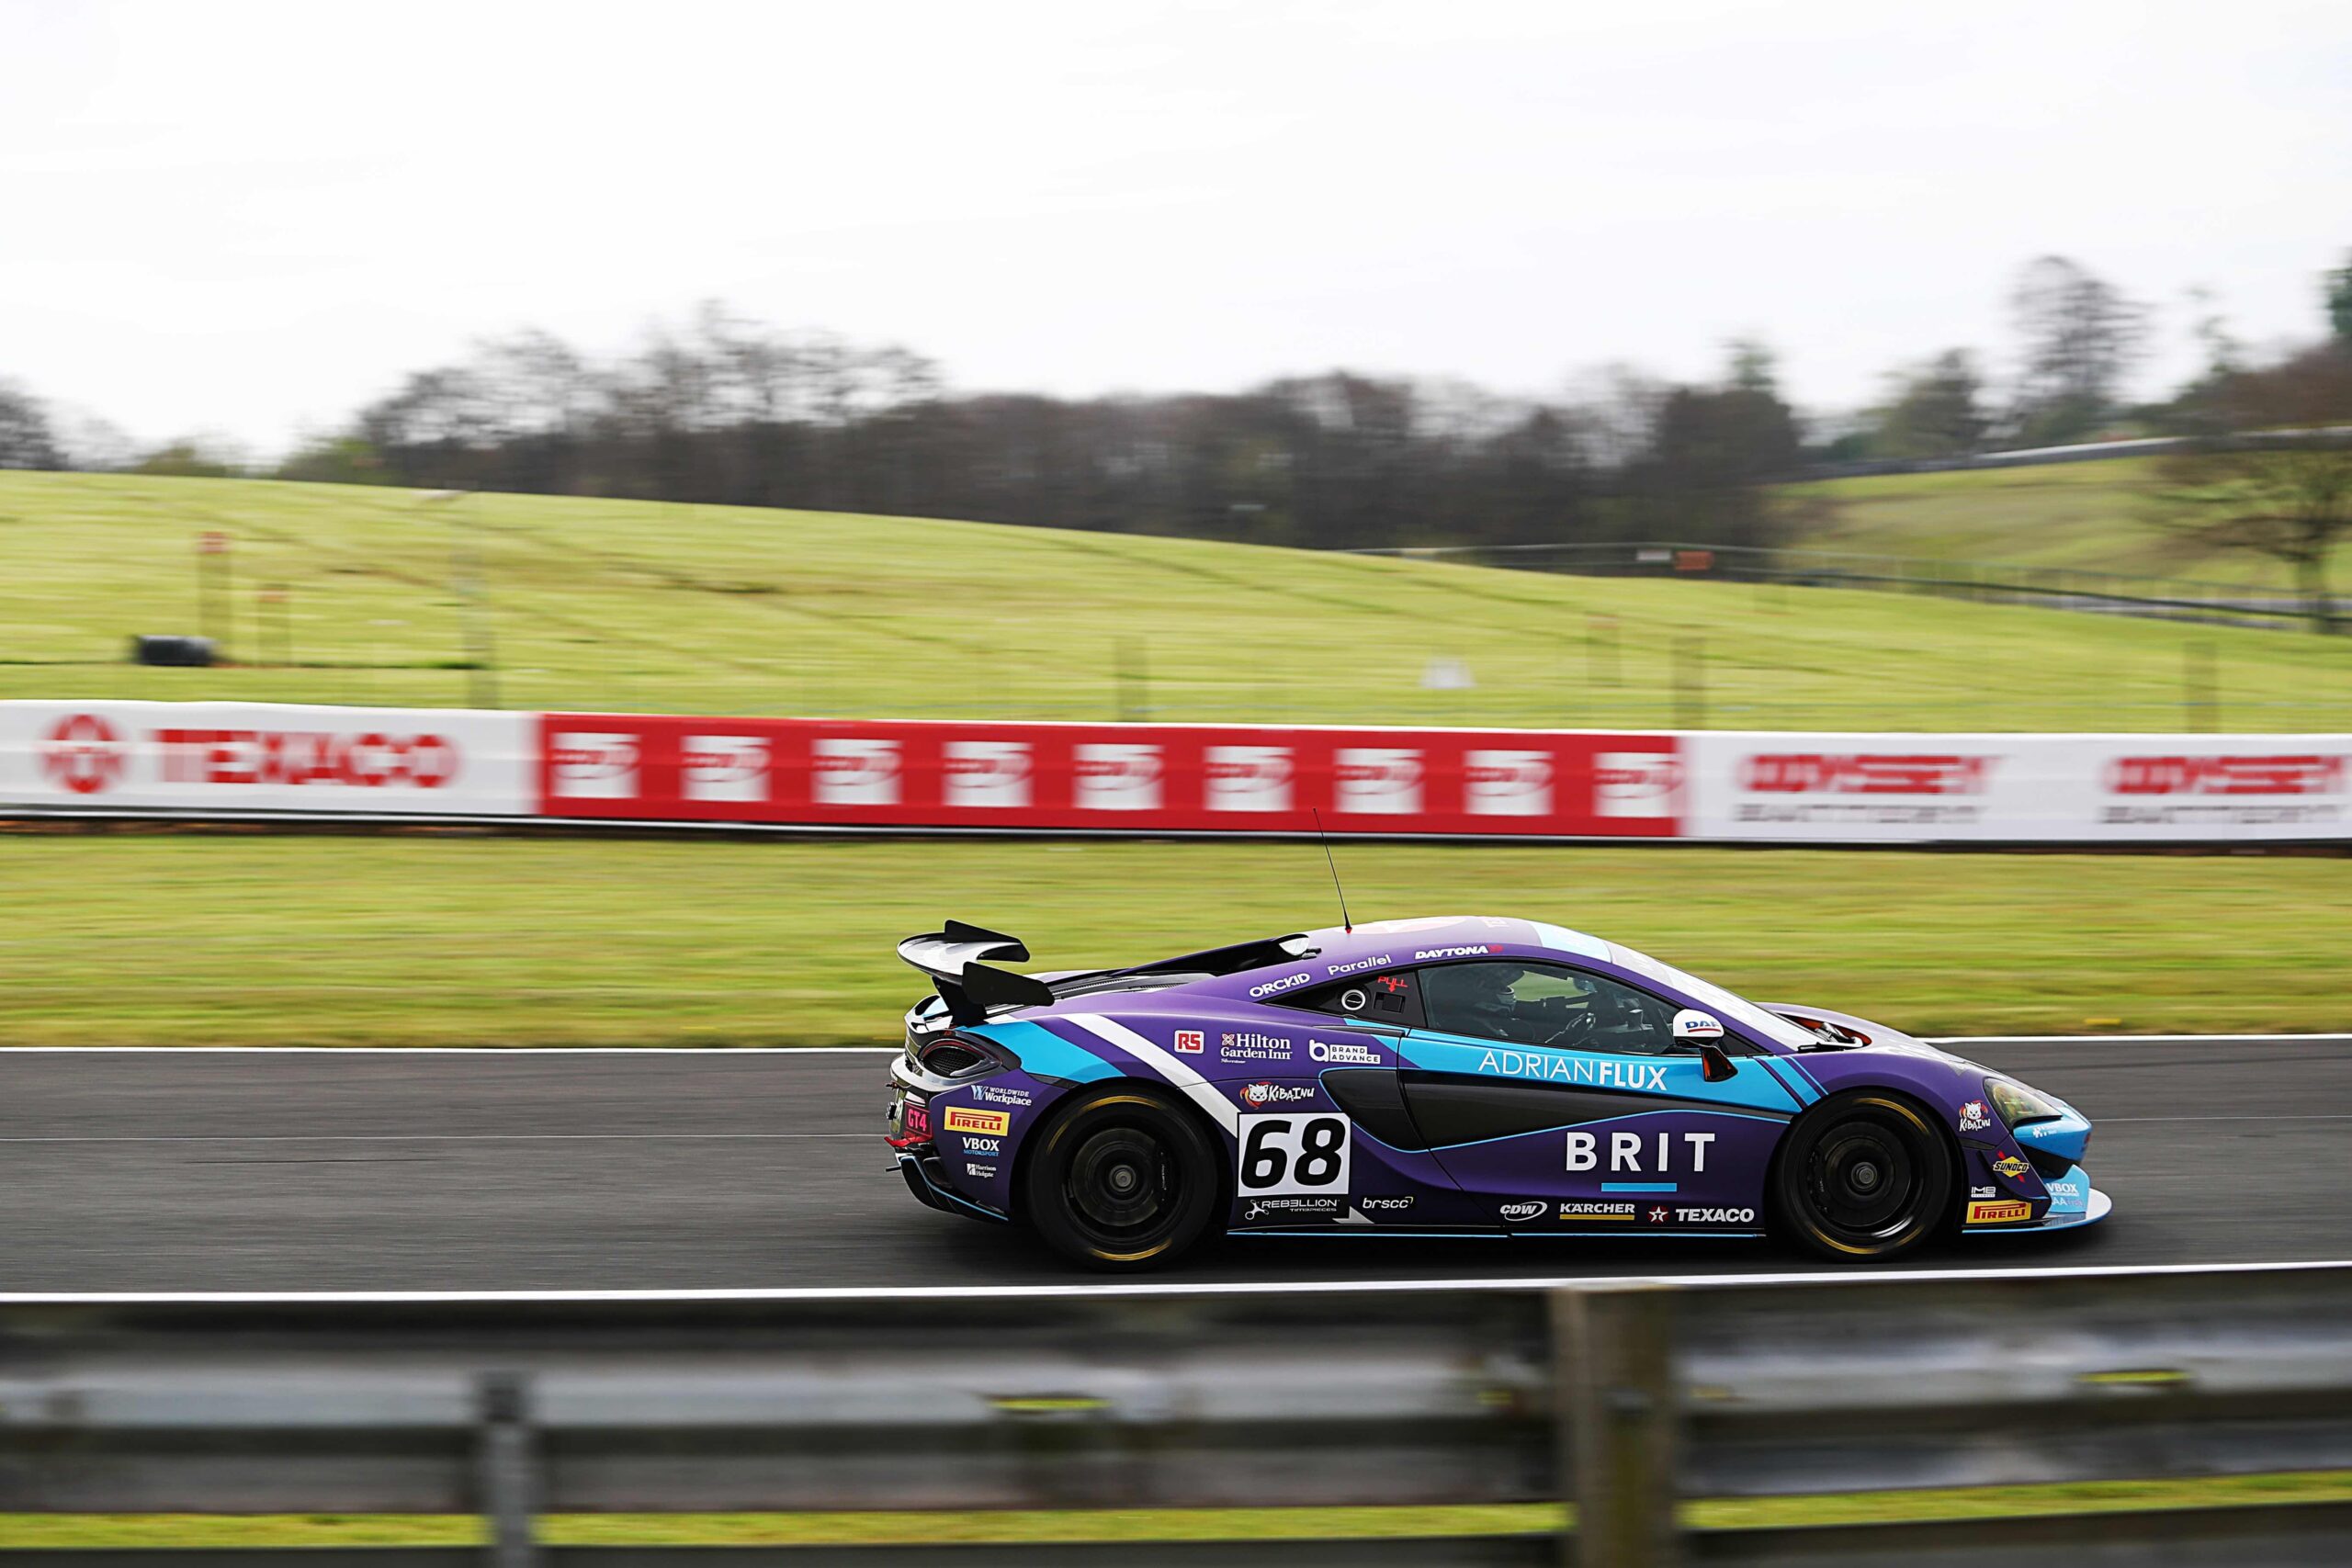 RS champions access to motorsport with sponsorship of all-disabled Team BRIT